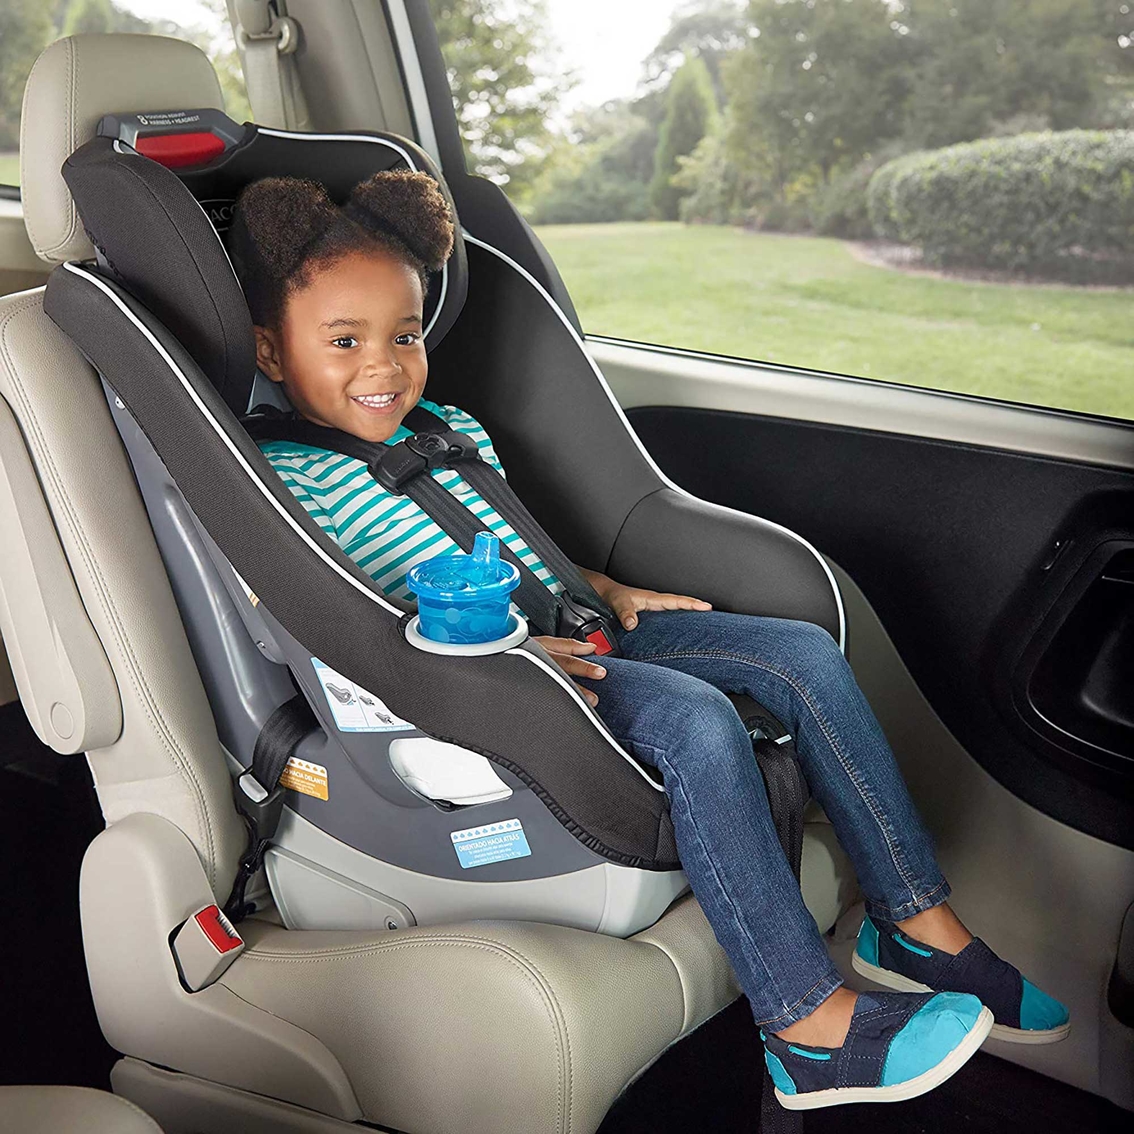 Graco Contender 65 Convertible Car Seat - Image 3 of 4